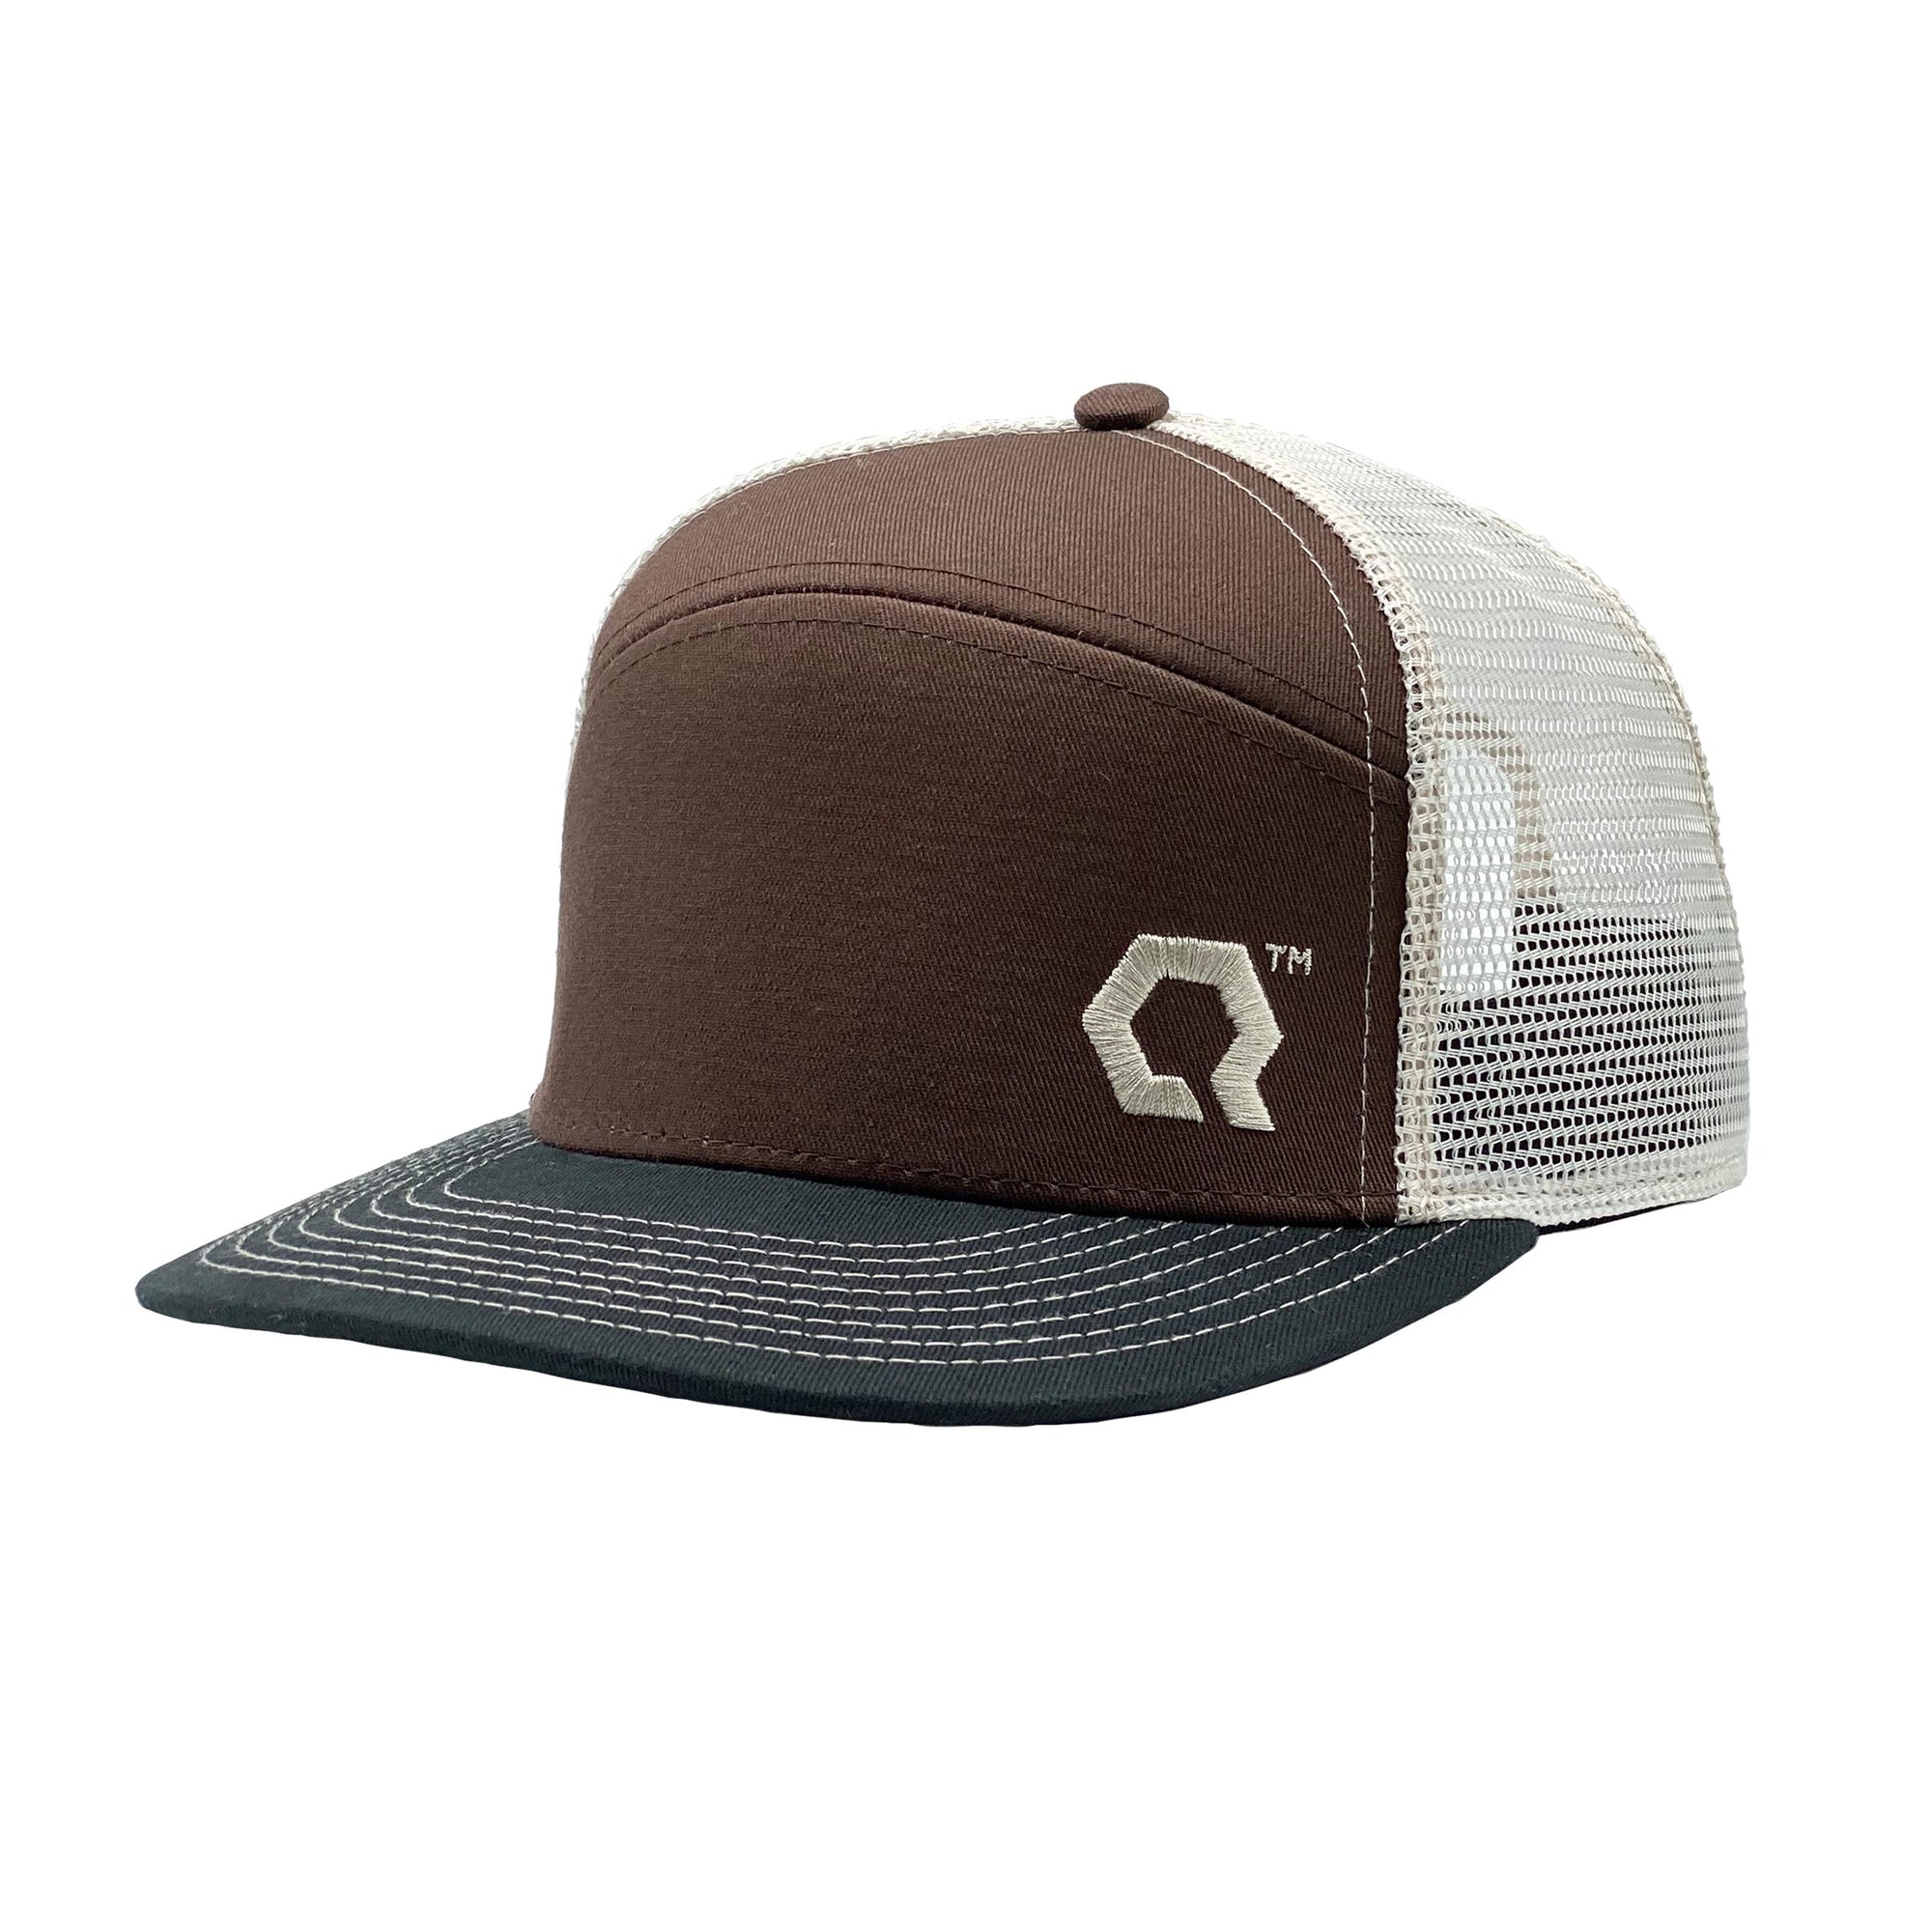 Keep a cool head in these crazy times with our classic high-crown QLTY Tradesman 6-panel hat that features ample headroom for ventilation, an organic cotton front, recycled polyester mesh back and adjustable snap closure with embroidered logo